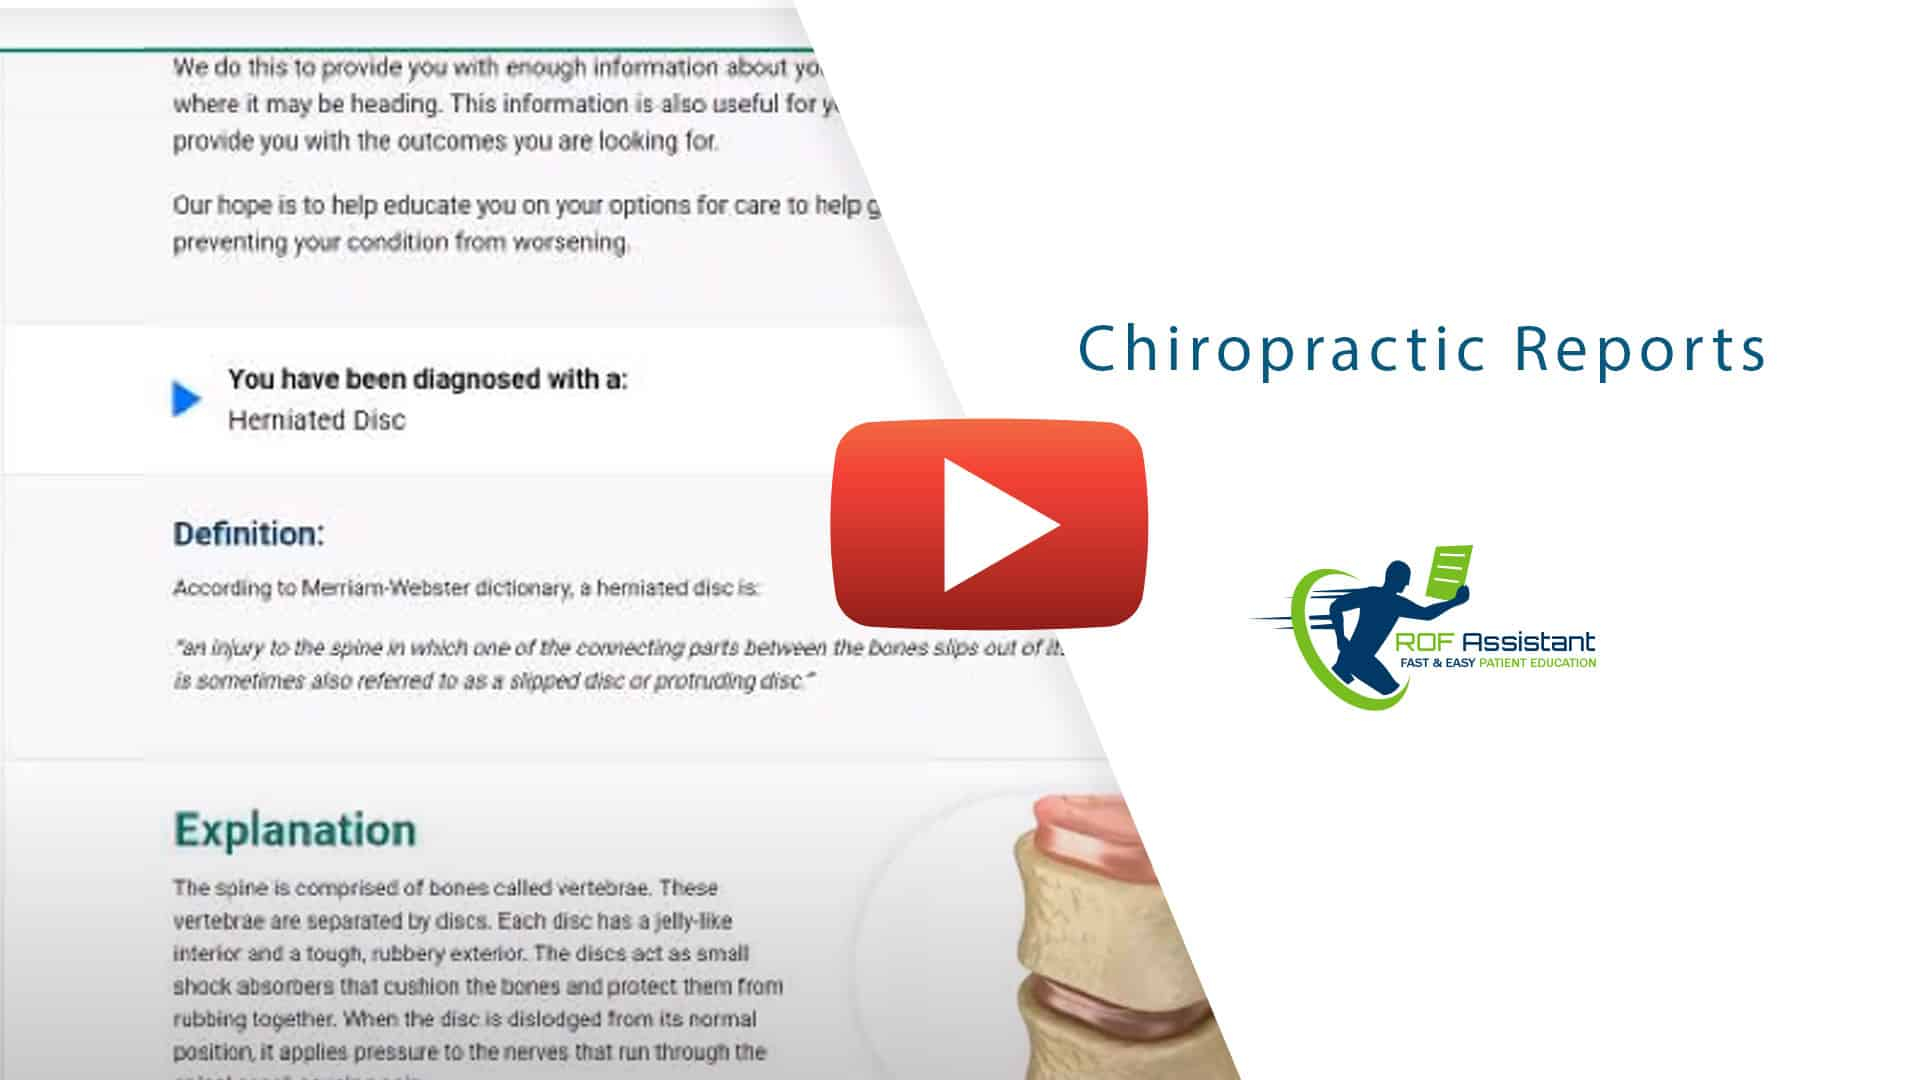 Chiropractic Report of Findings  Affordable Web-Based Application